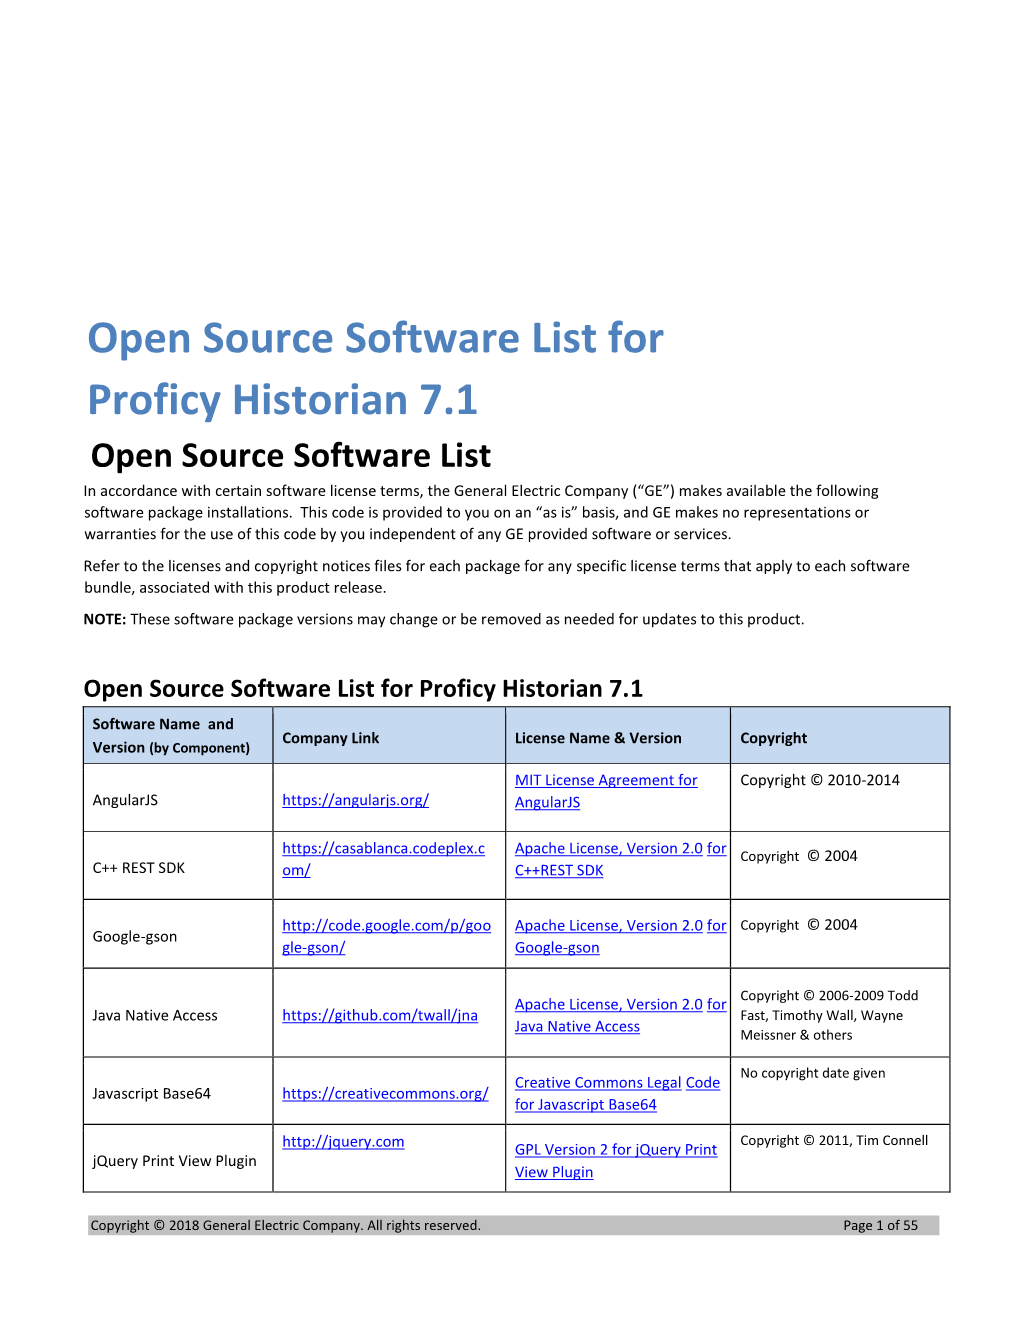 Open Source Software List for Proficy Historian